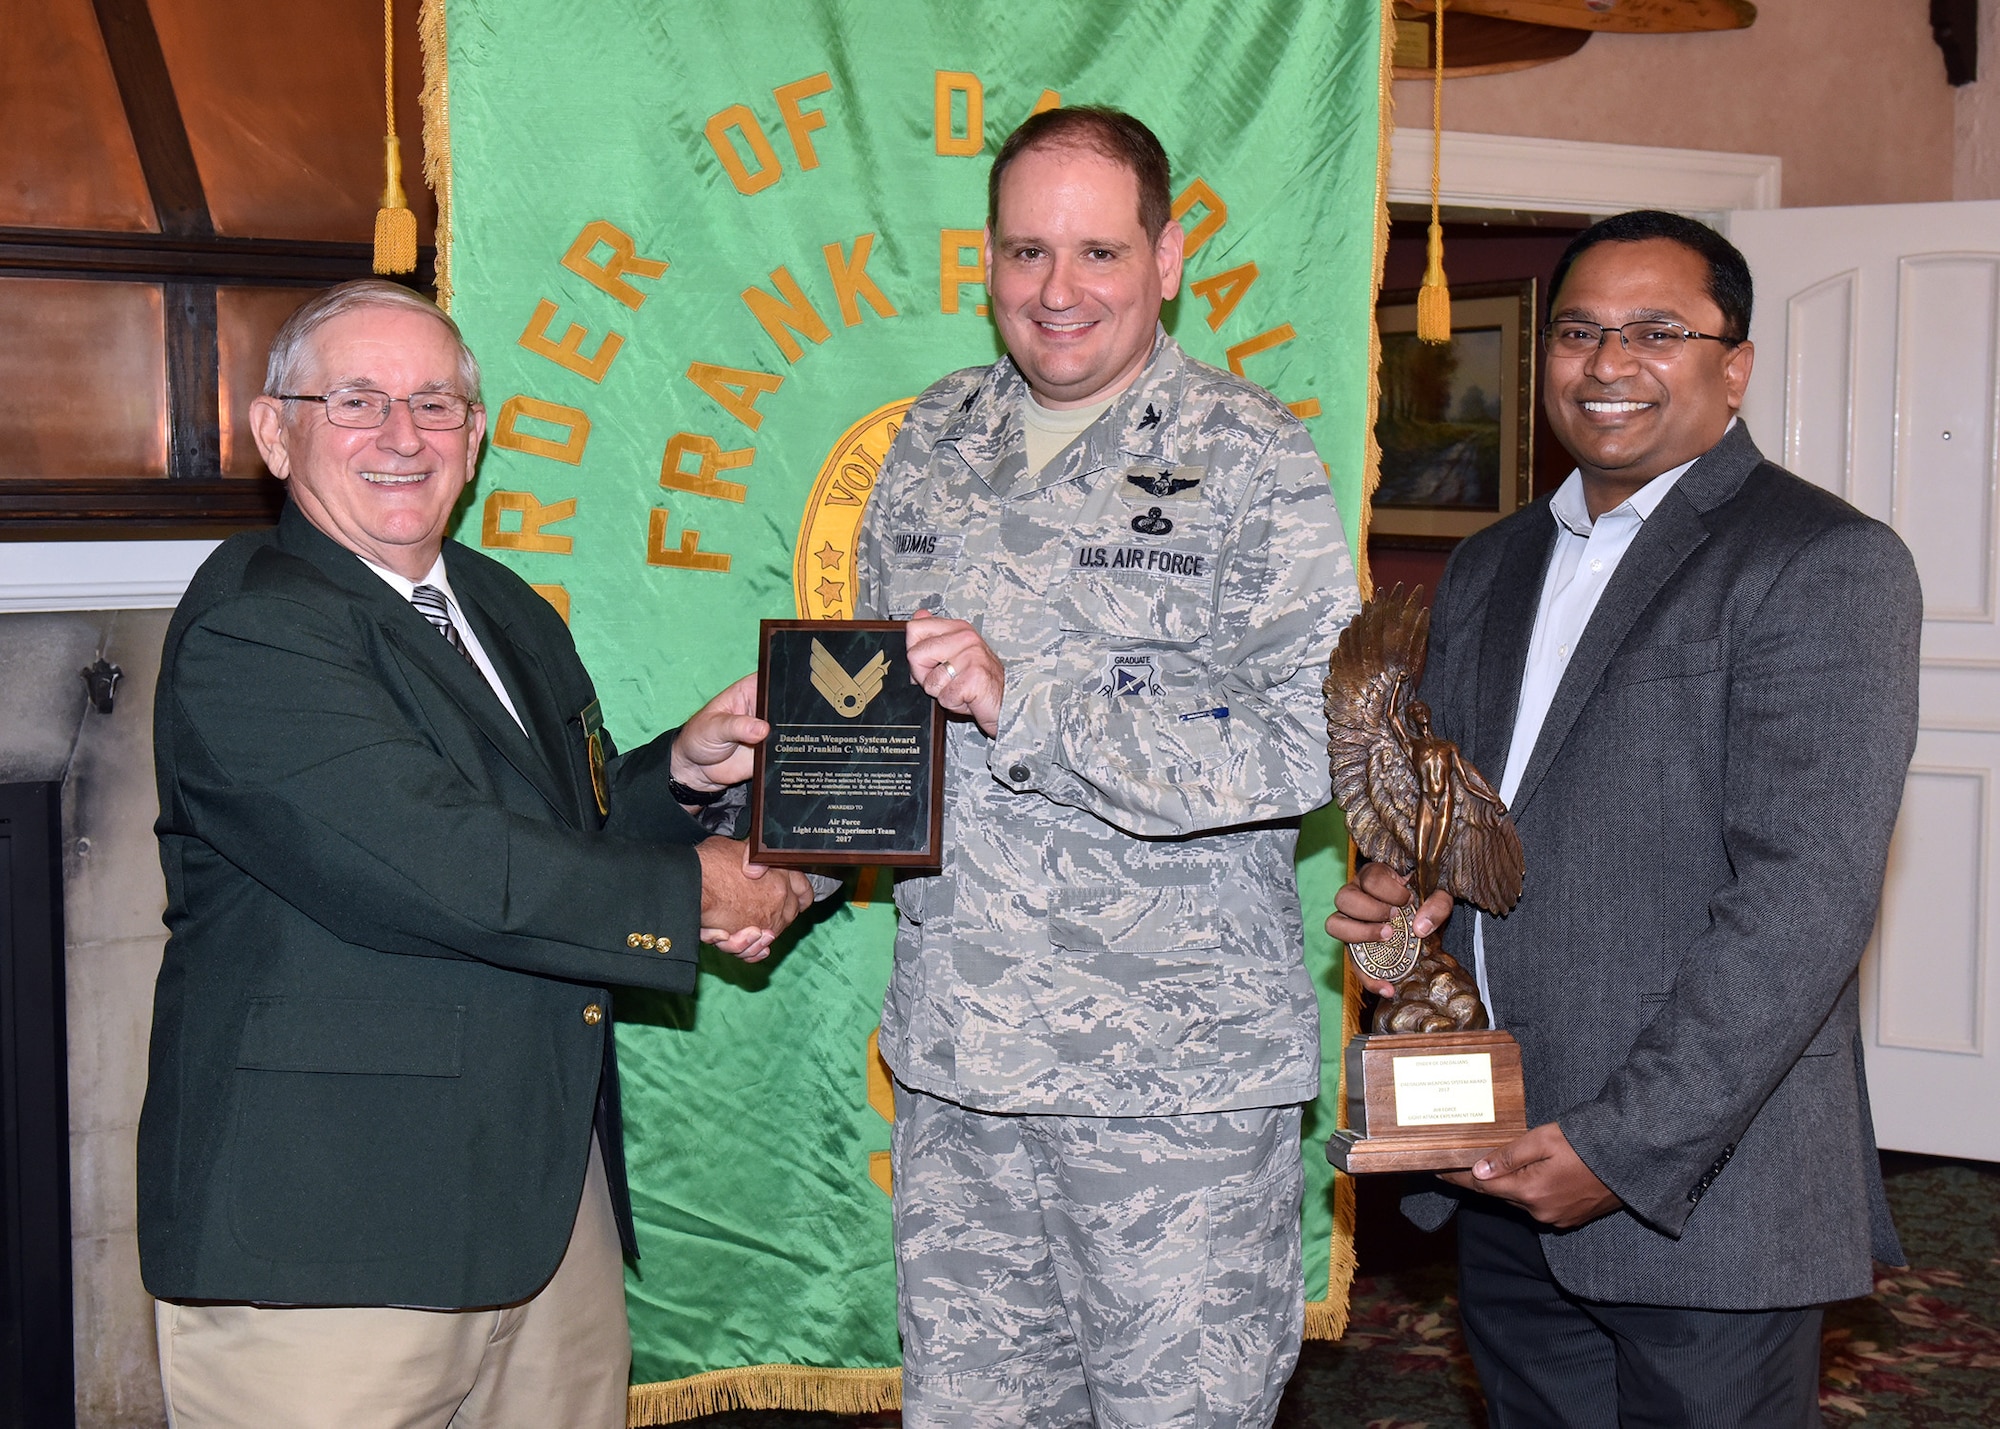 Jim DeStout, left, Adjutant, Flight 9 – Frank P. Lahm Order of Daedailians, presents the 2017 Daedalian Colonel Franklin C. Wolfe Weapon Systems Award plaque to Col. Anthony Thomas, Air Force Life Cycle Management Center advisor to the Light Attack Experiment Phase 1 team, and trophy to Dr. Ravi Penmetsa, Light Attack Experiment Team Lead Sept. 20, 2018. The combined efforts of personnel from the Air Force Life Cycle Management Center and Air Force Research Laboratory contributed to the overall success of the Phase I Experiment effort, which, in turn, paved the way for the Phase II Experiment in 2018 and the further development and maturation of the USAF Light Attack Aircraft acquisition strategy. (U.S. Air Force photo/Al Bright)